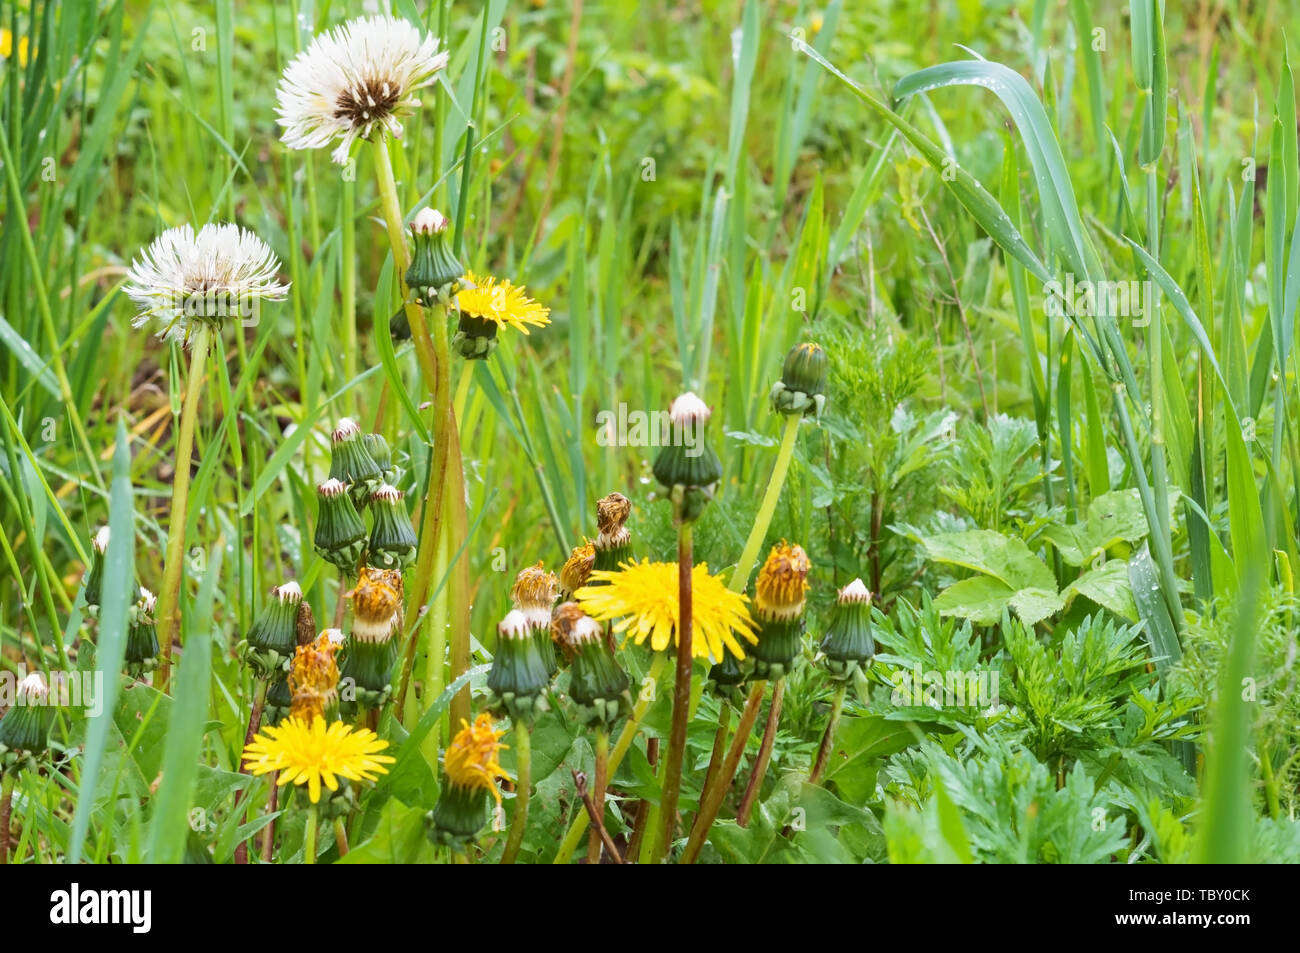 wildflowers and herbs, dandelions among the green grass in the field Stock Photo